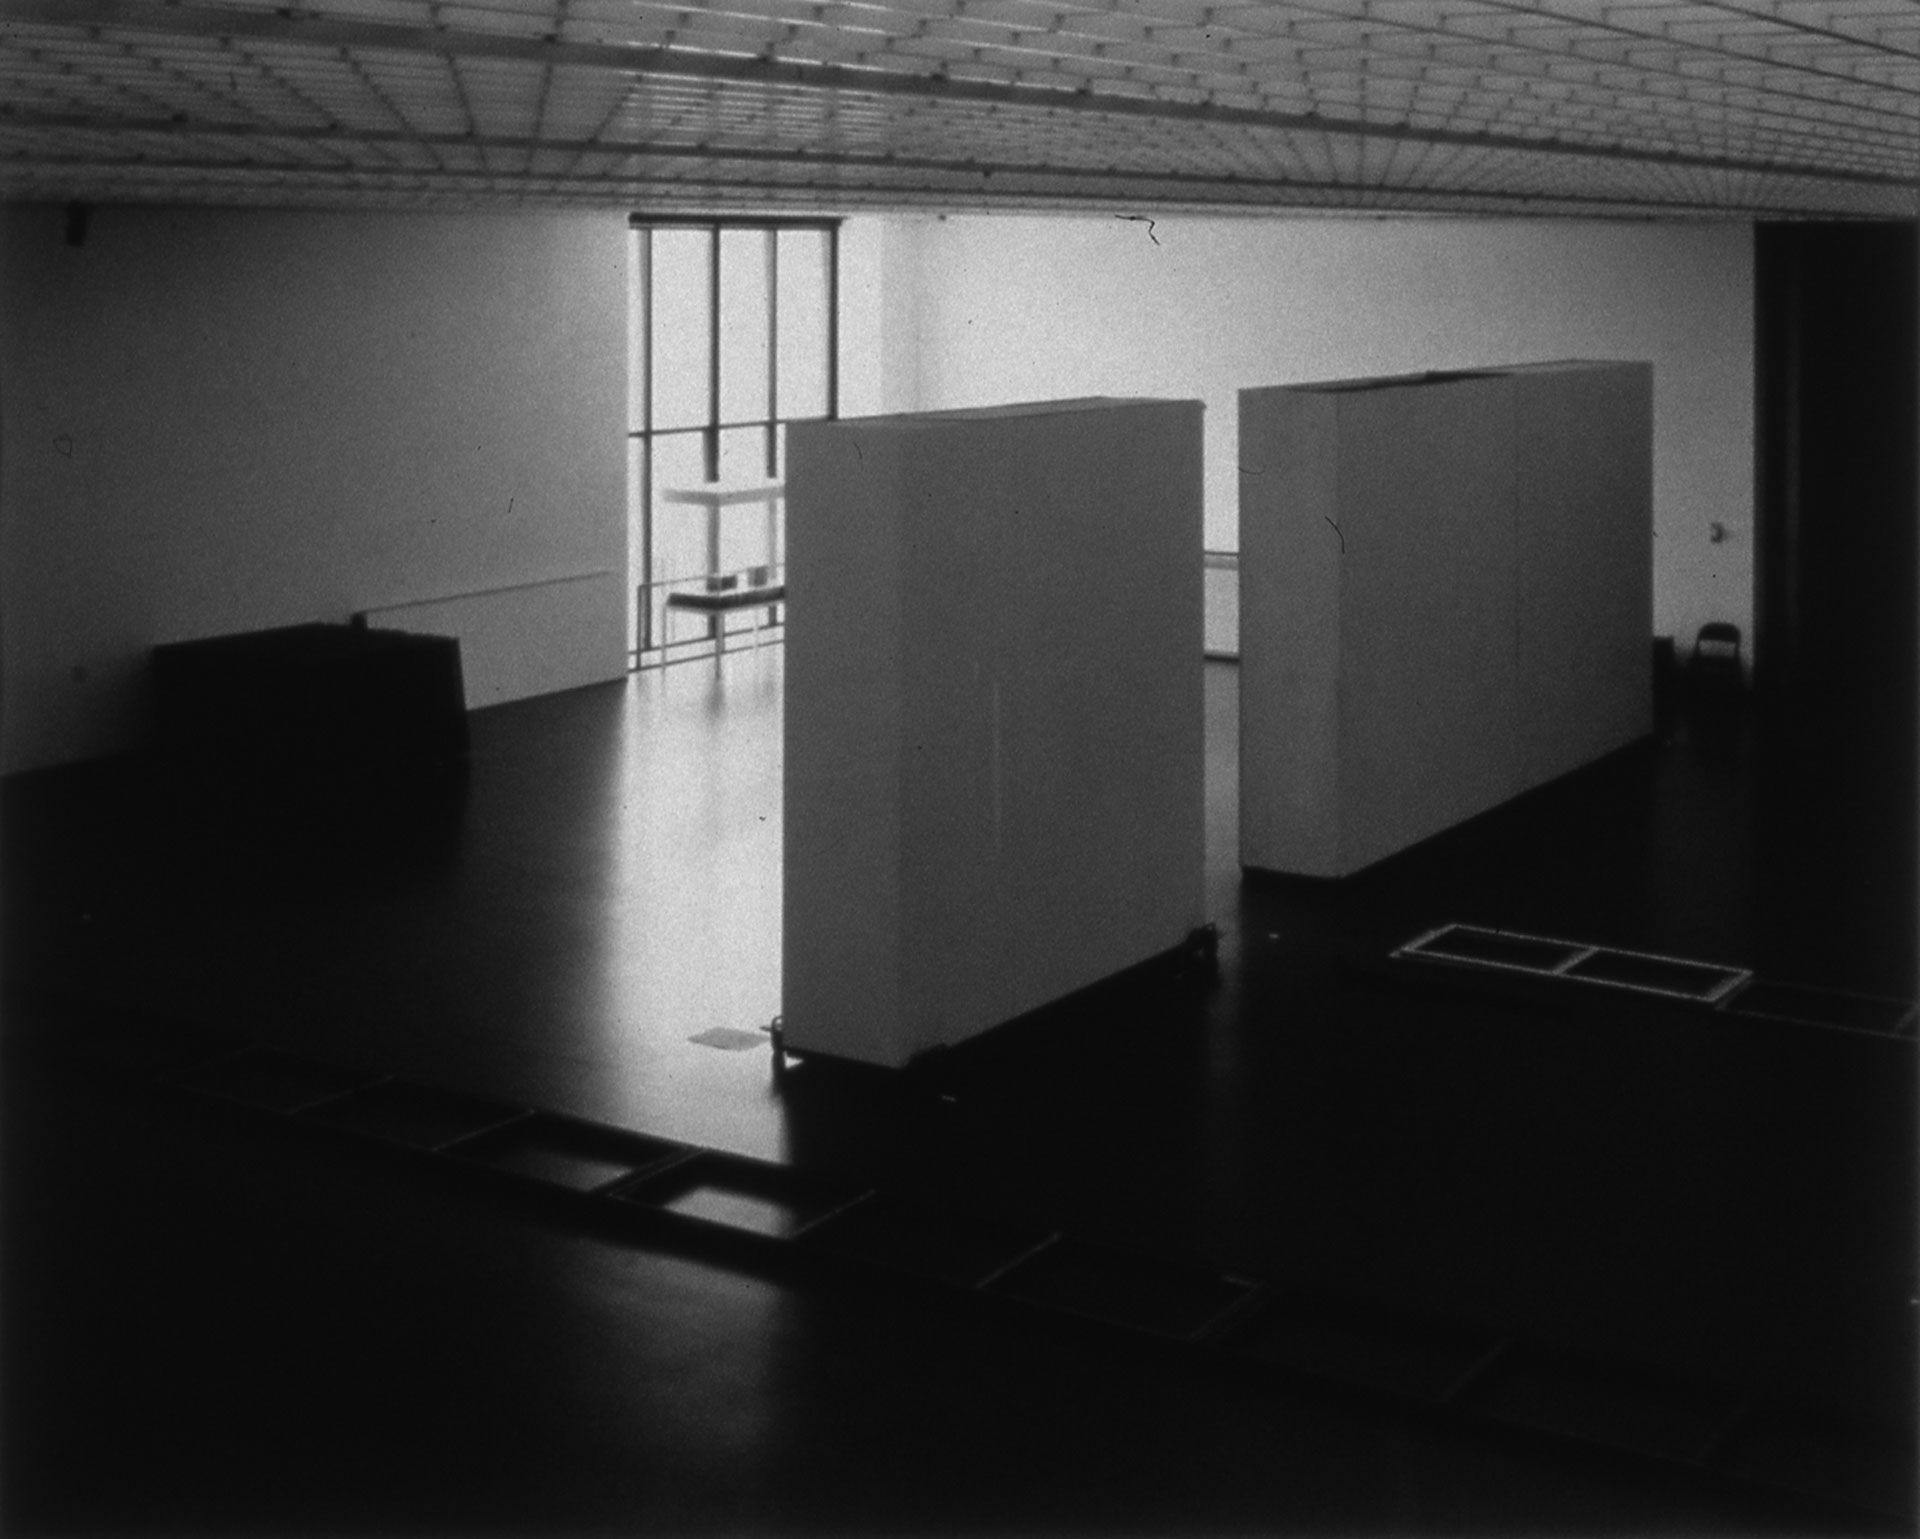 A photograph by Christopher Williams titled Mobile Wall Systems, (NR.1), dated 1996.